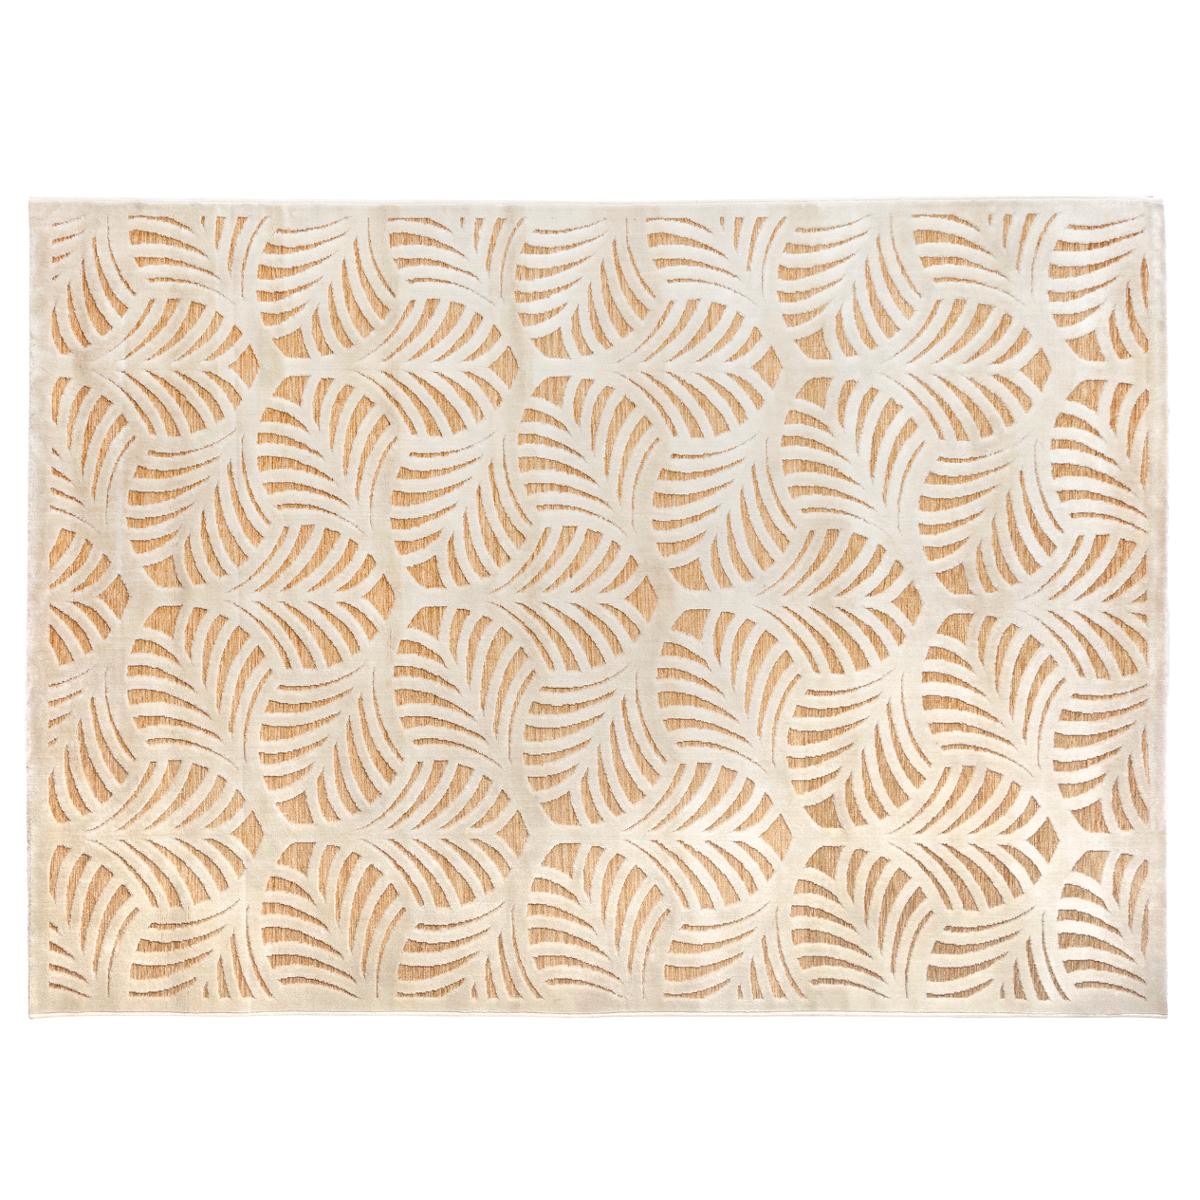 Tapis RELIEF FEUILLE 160X230